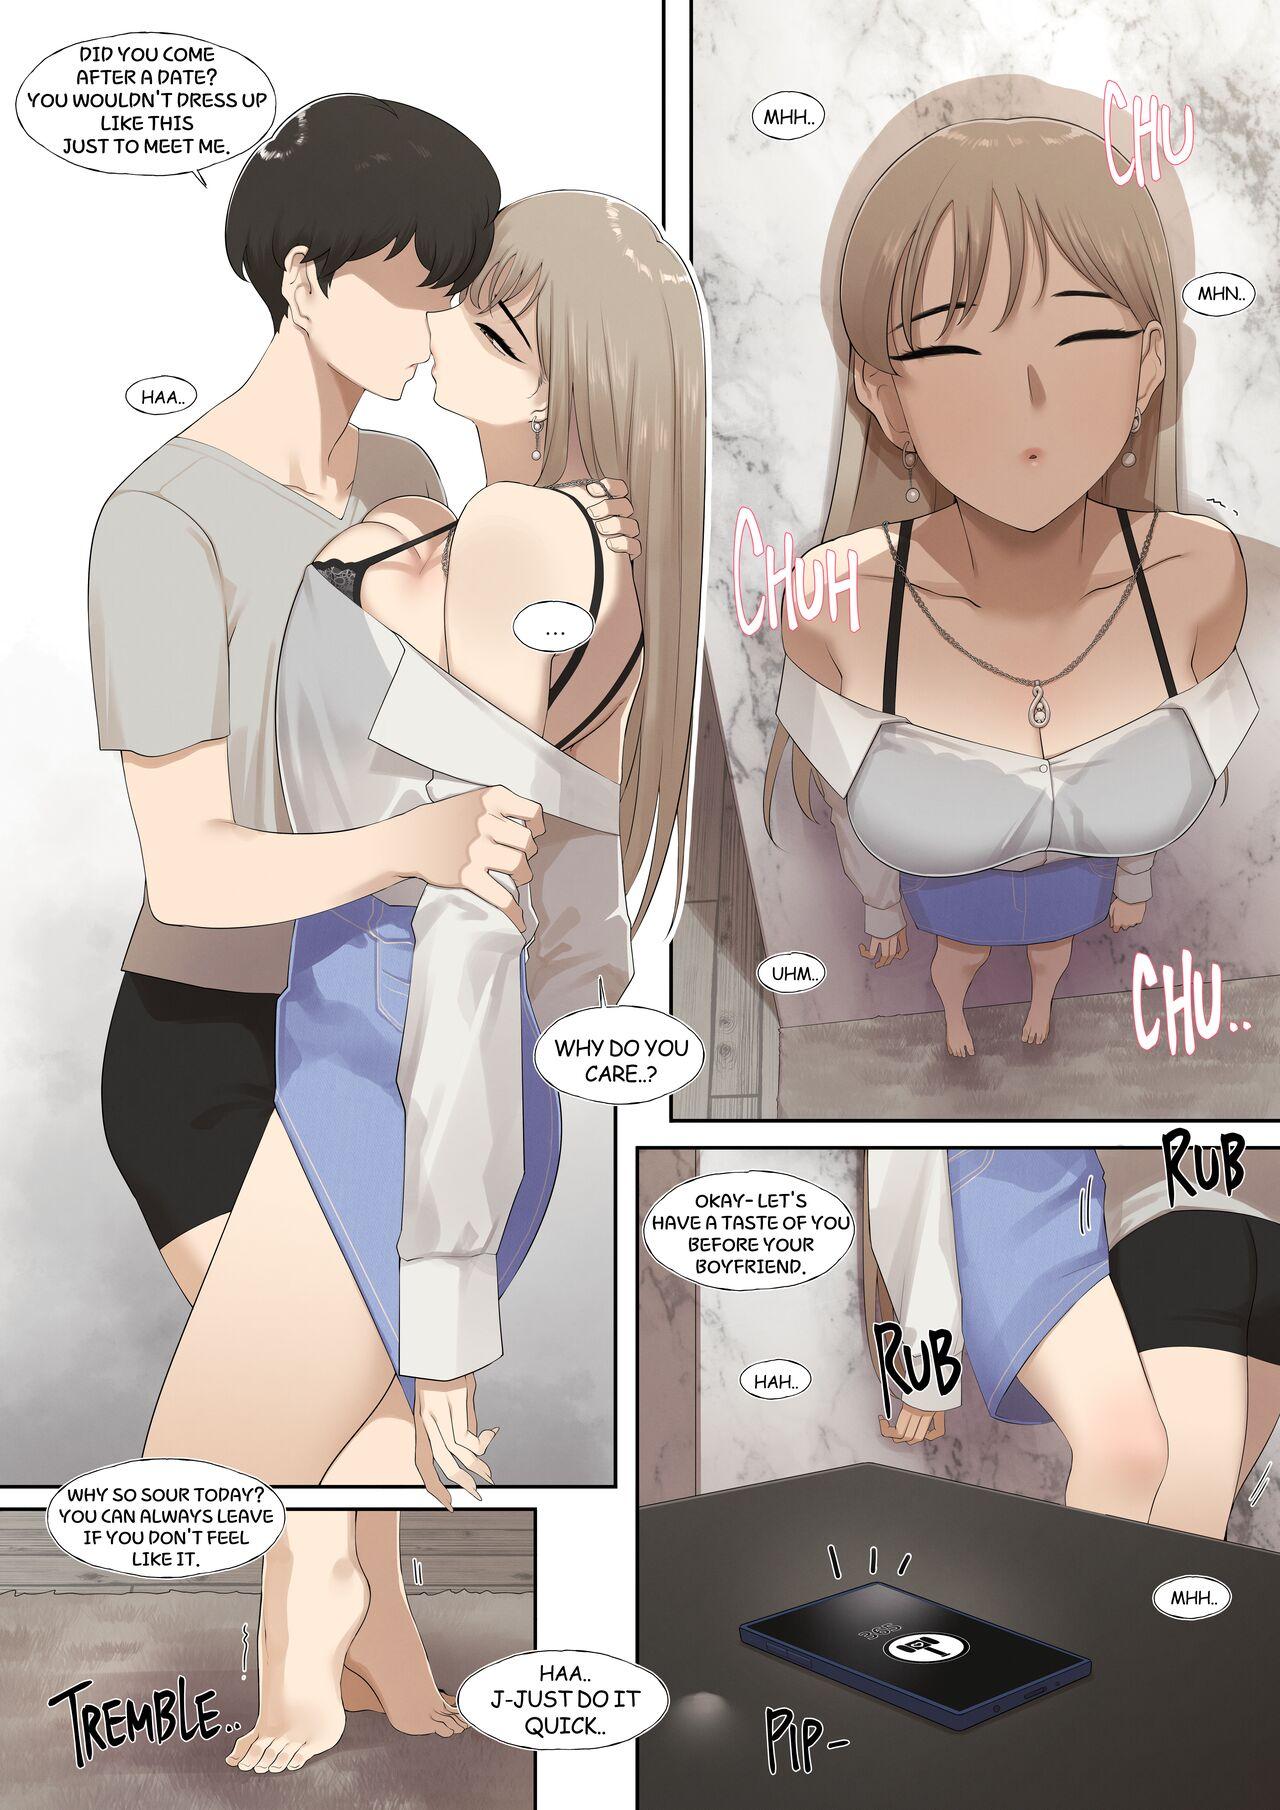 First Time Common sense alteration - A world one can be forgiven with mating - Original Ass Fetish - Page 4